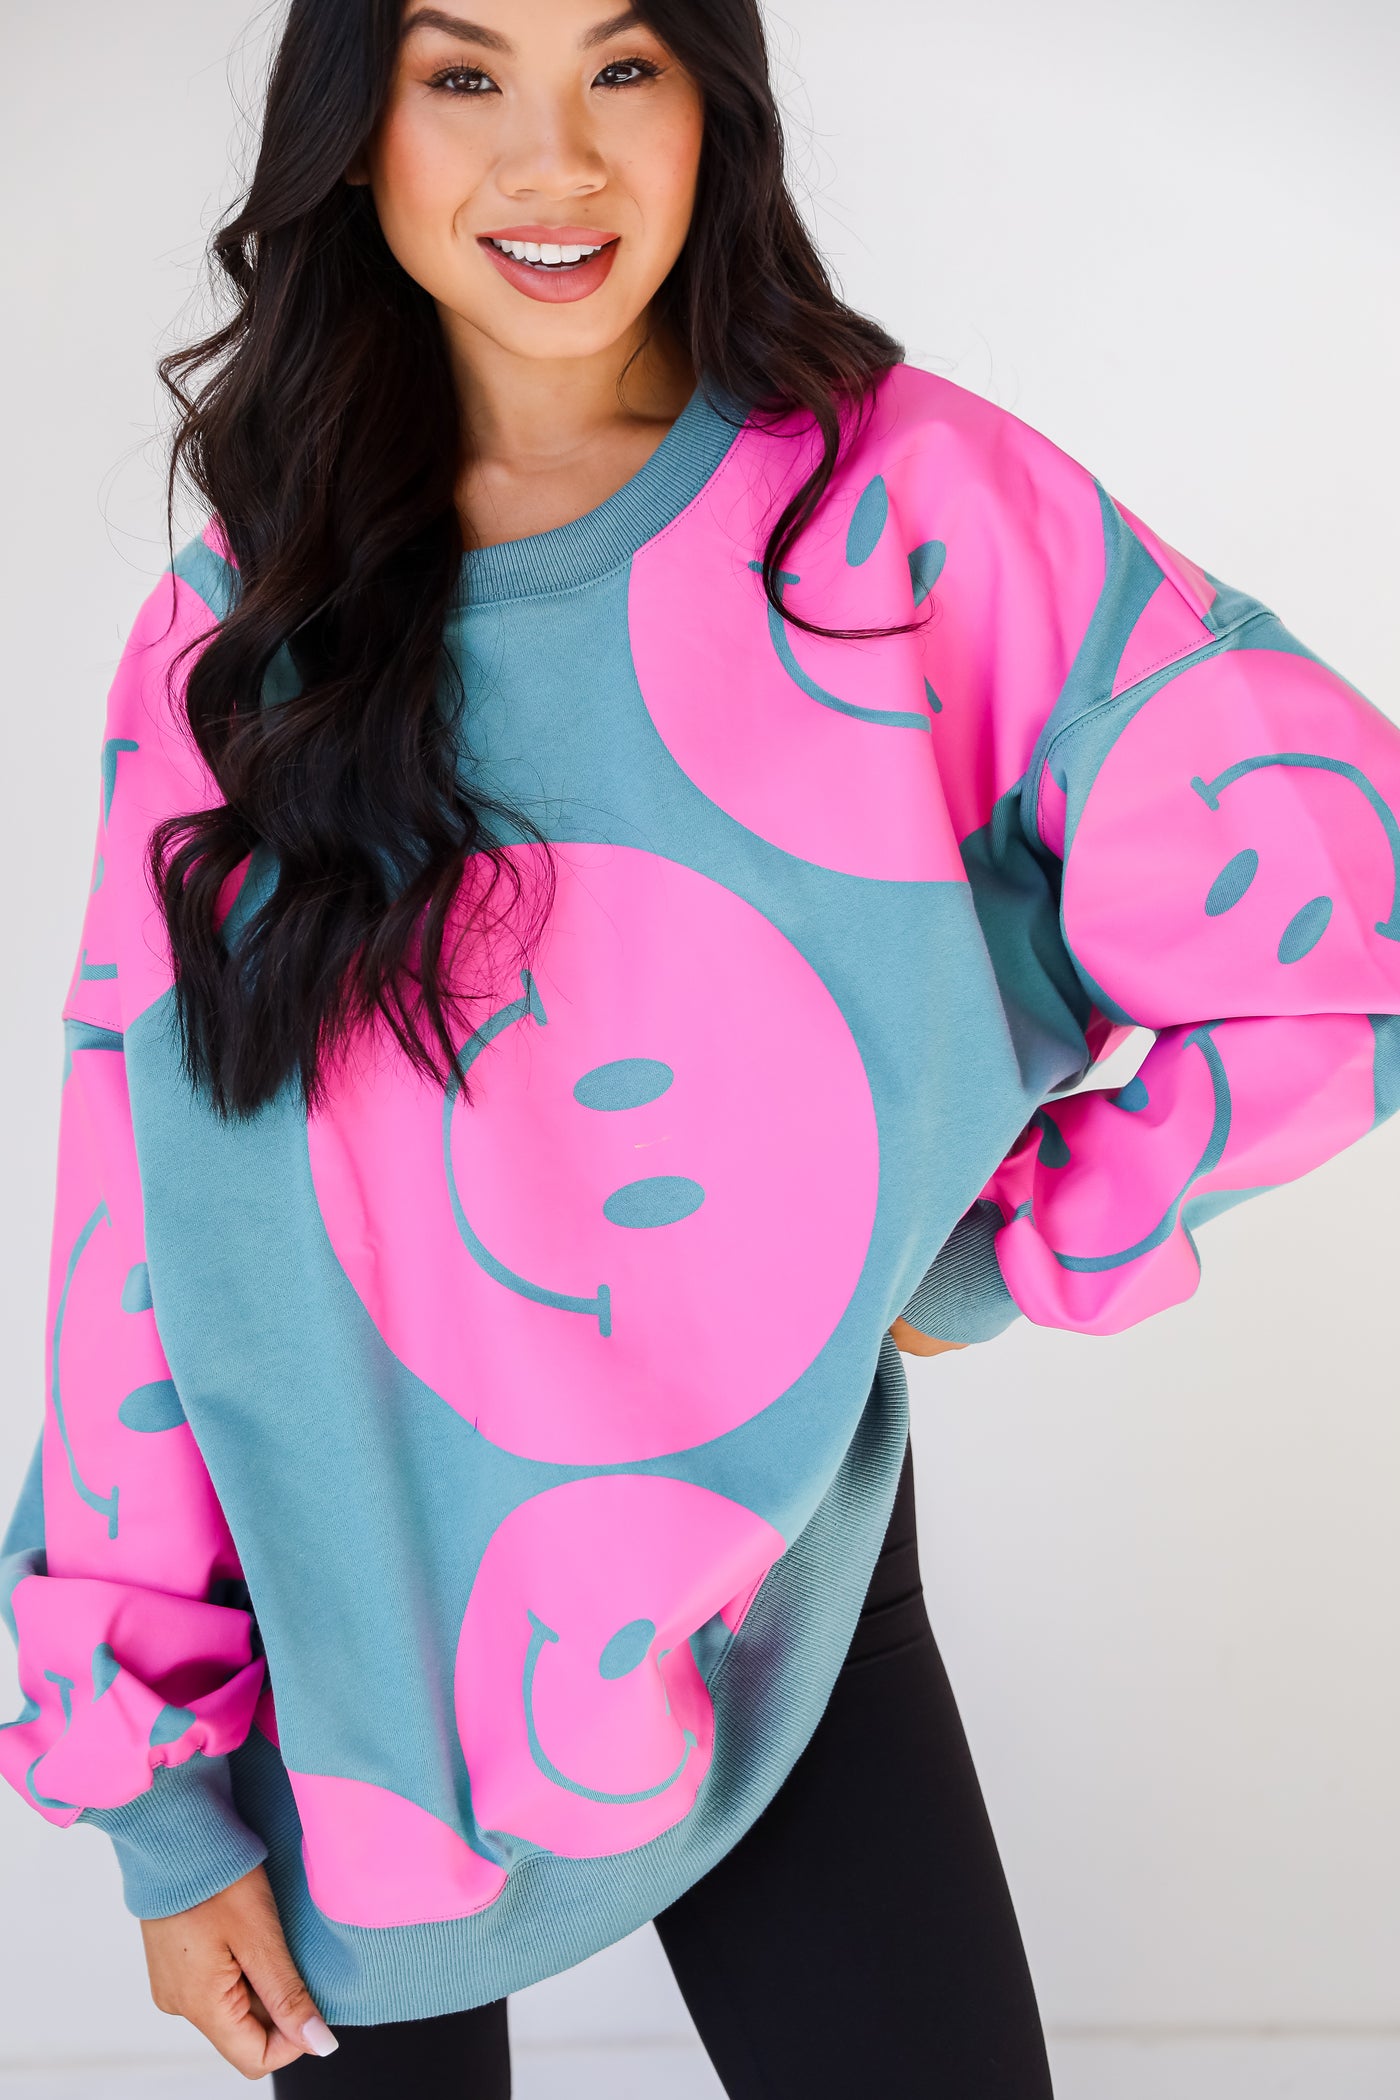 Smiley Face Pullover close up